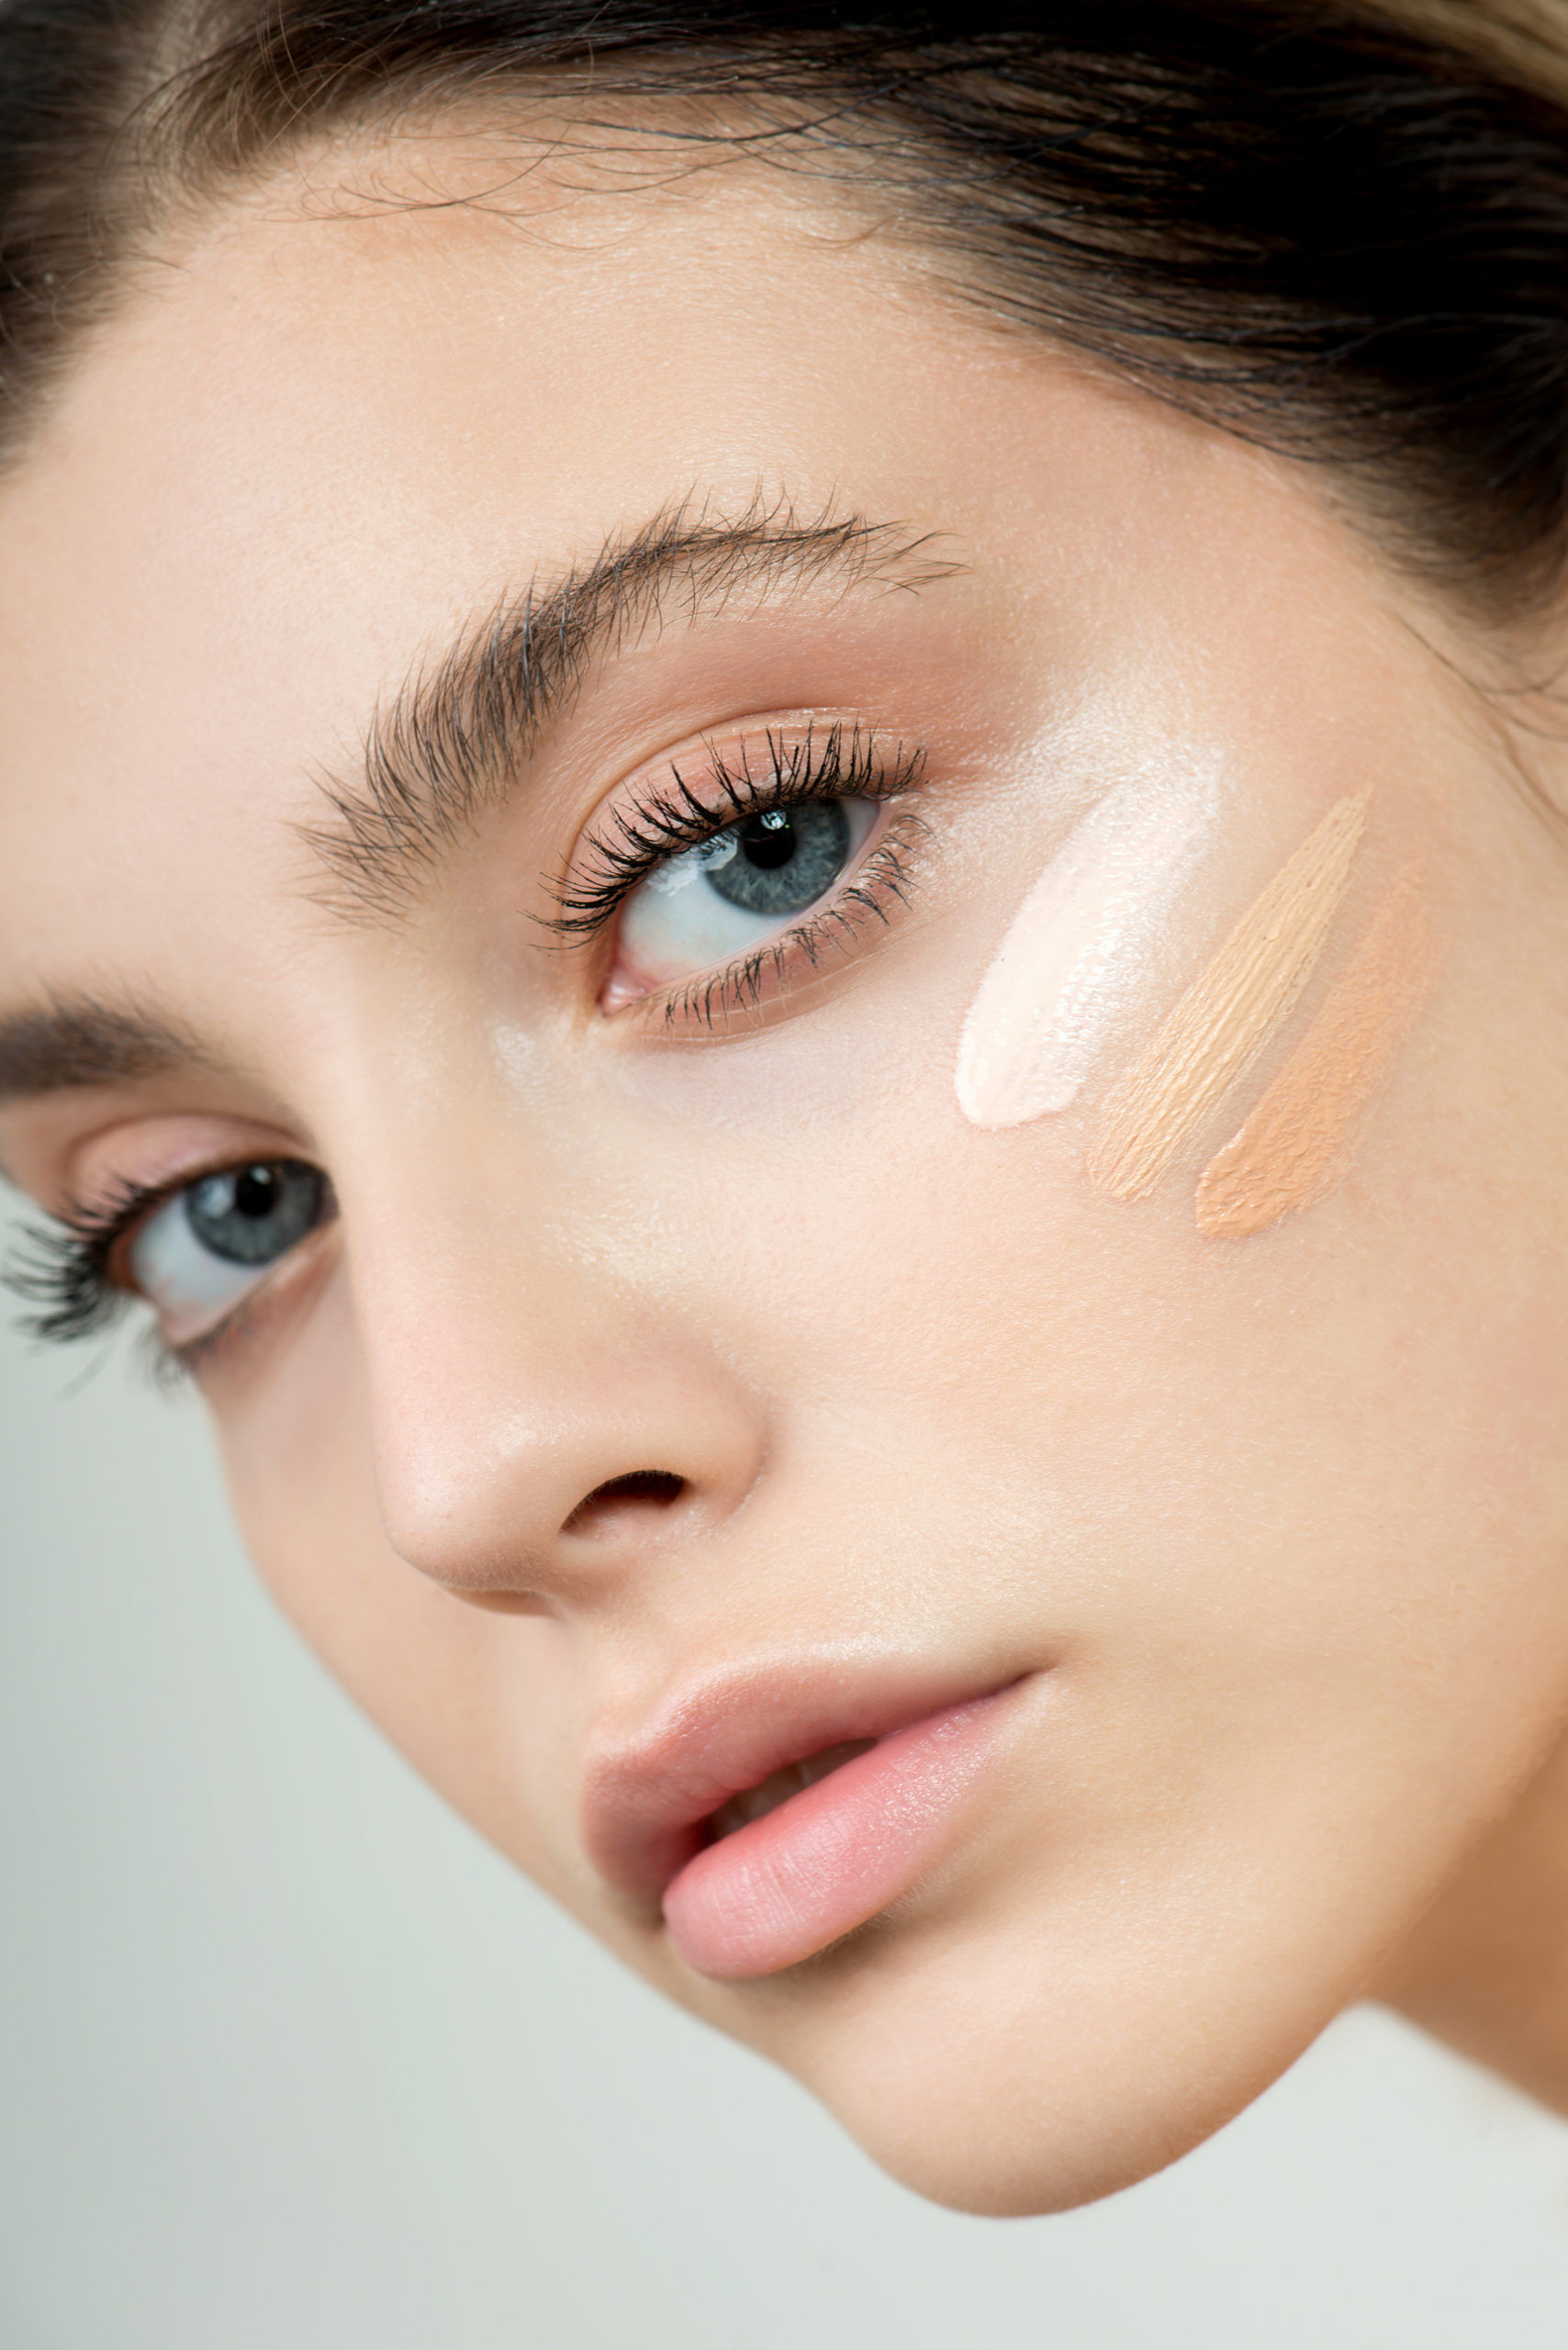 filter needed: CC creams for a natural summer makeup look